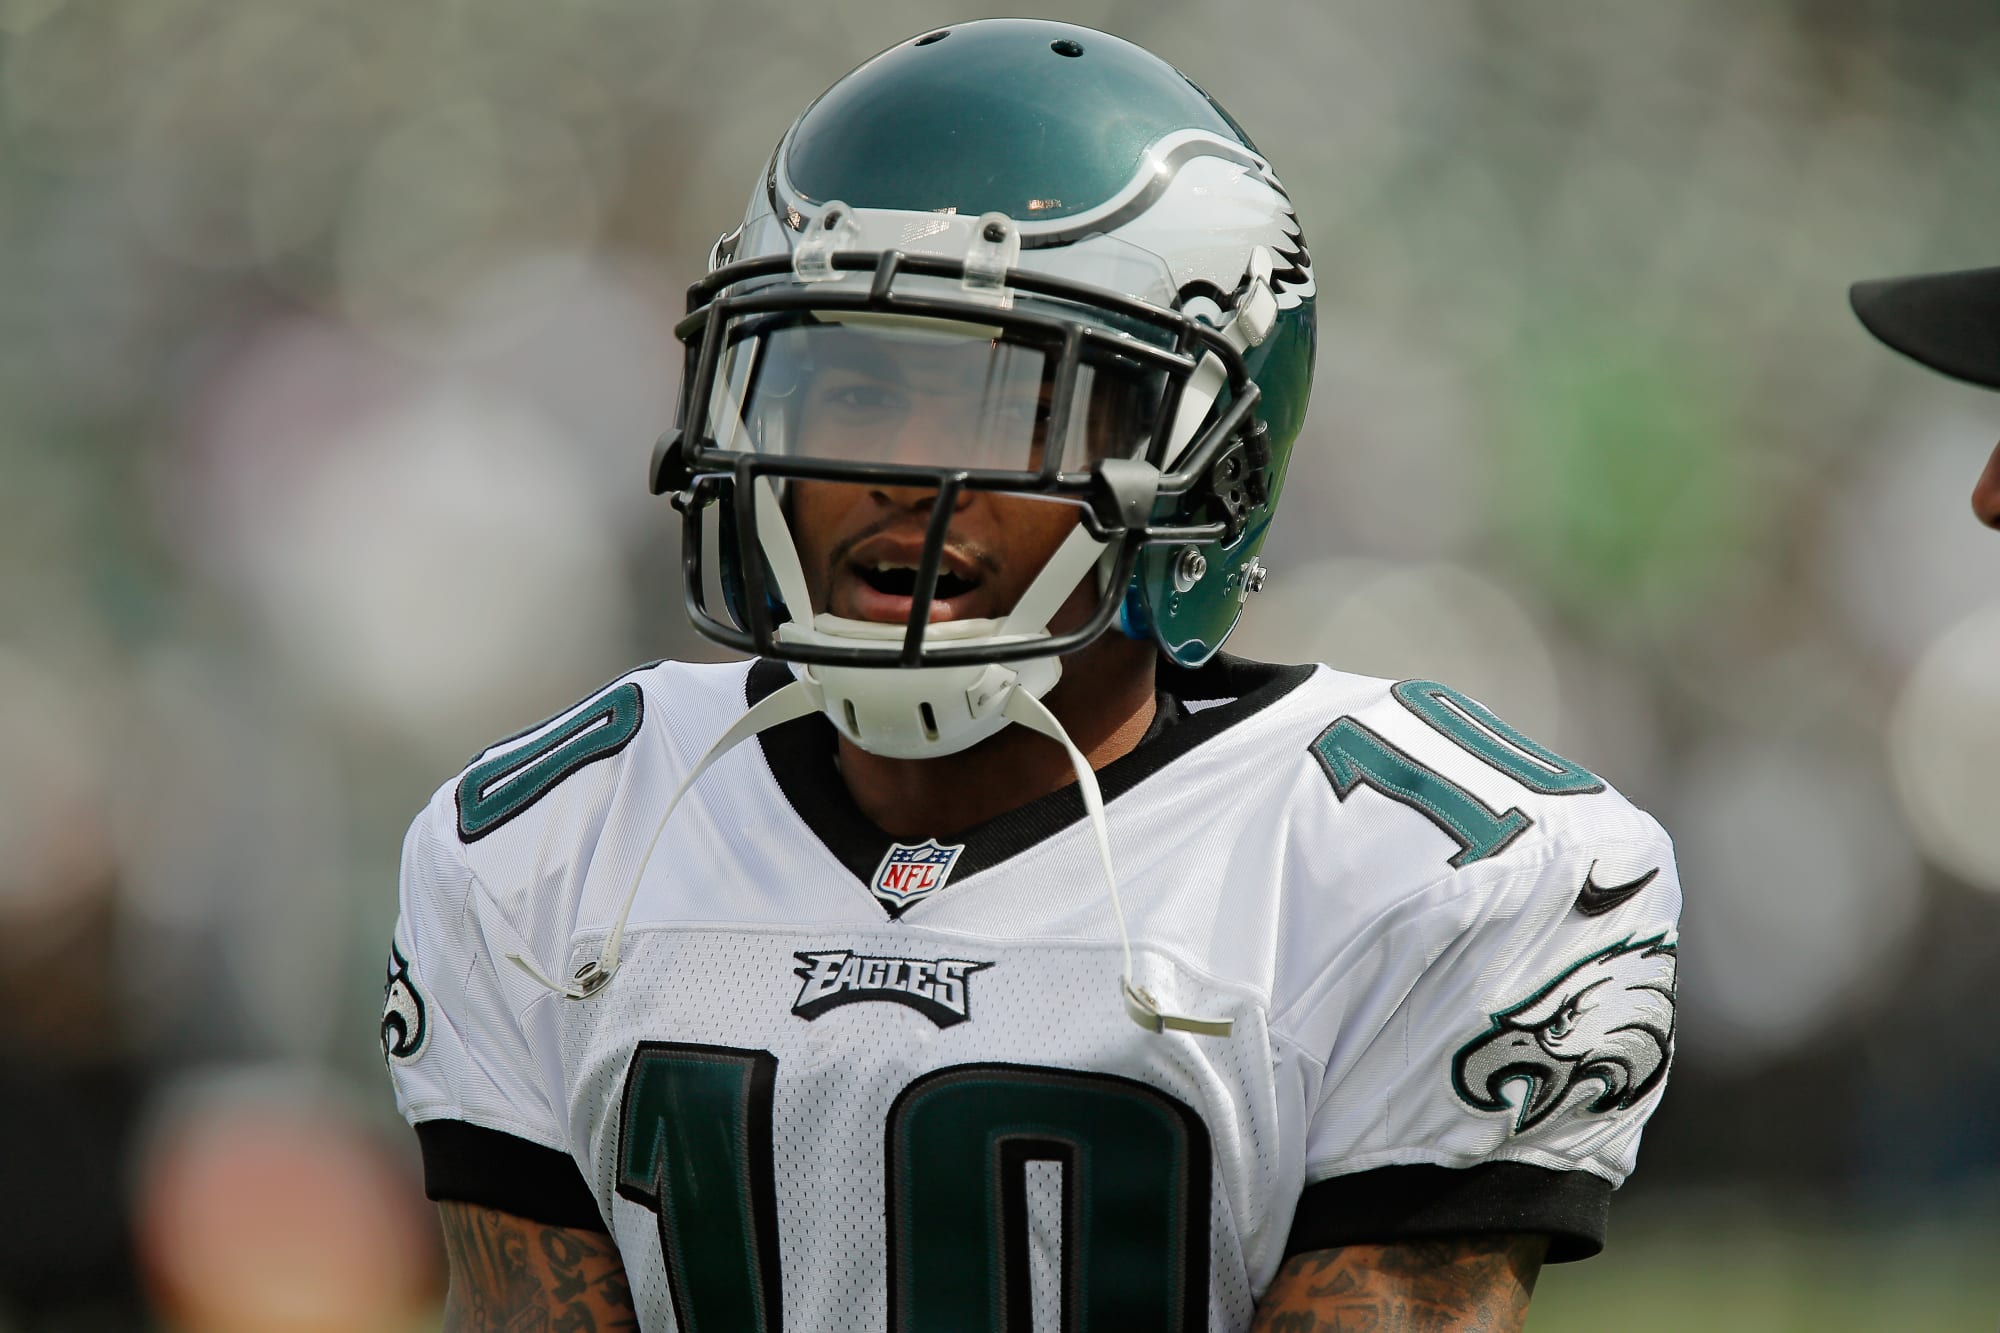 desean-jackson-is-the-latest-former-eagles-player-to-call-out-chip-kelly